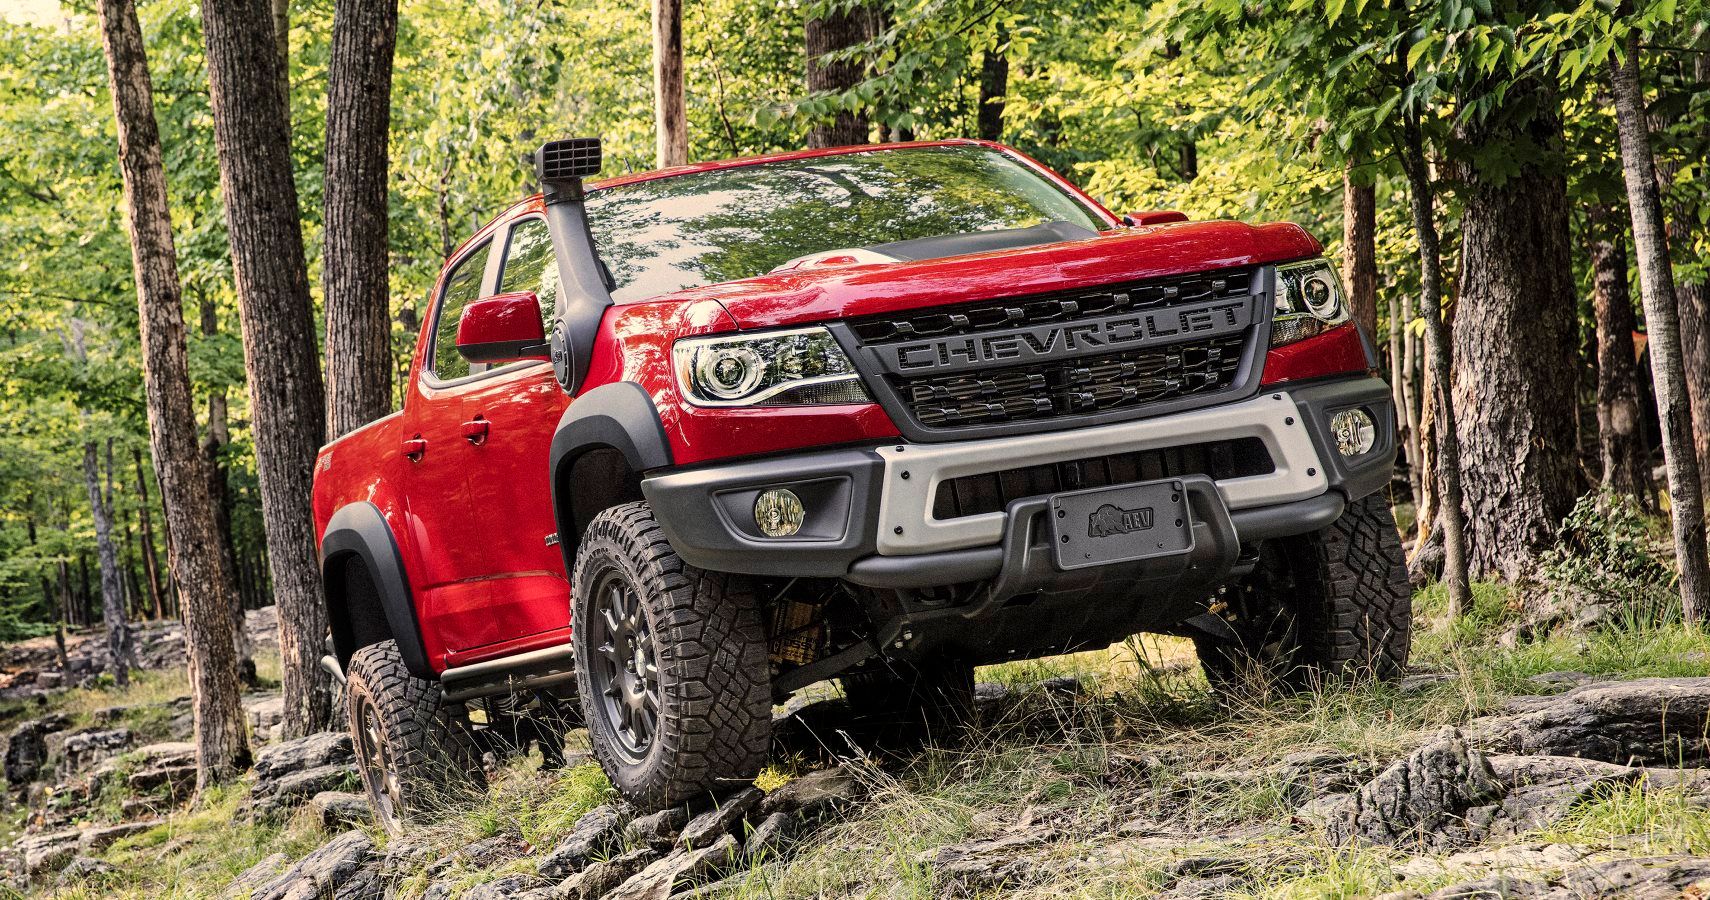 2019 Chevrolet Colorado ZR2 Will Be An Off-Road Monster